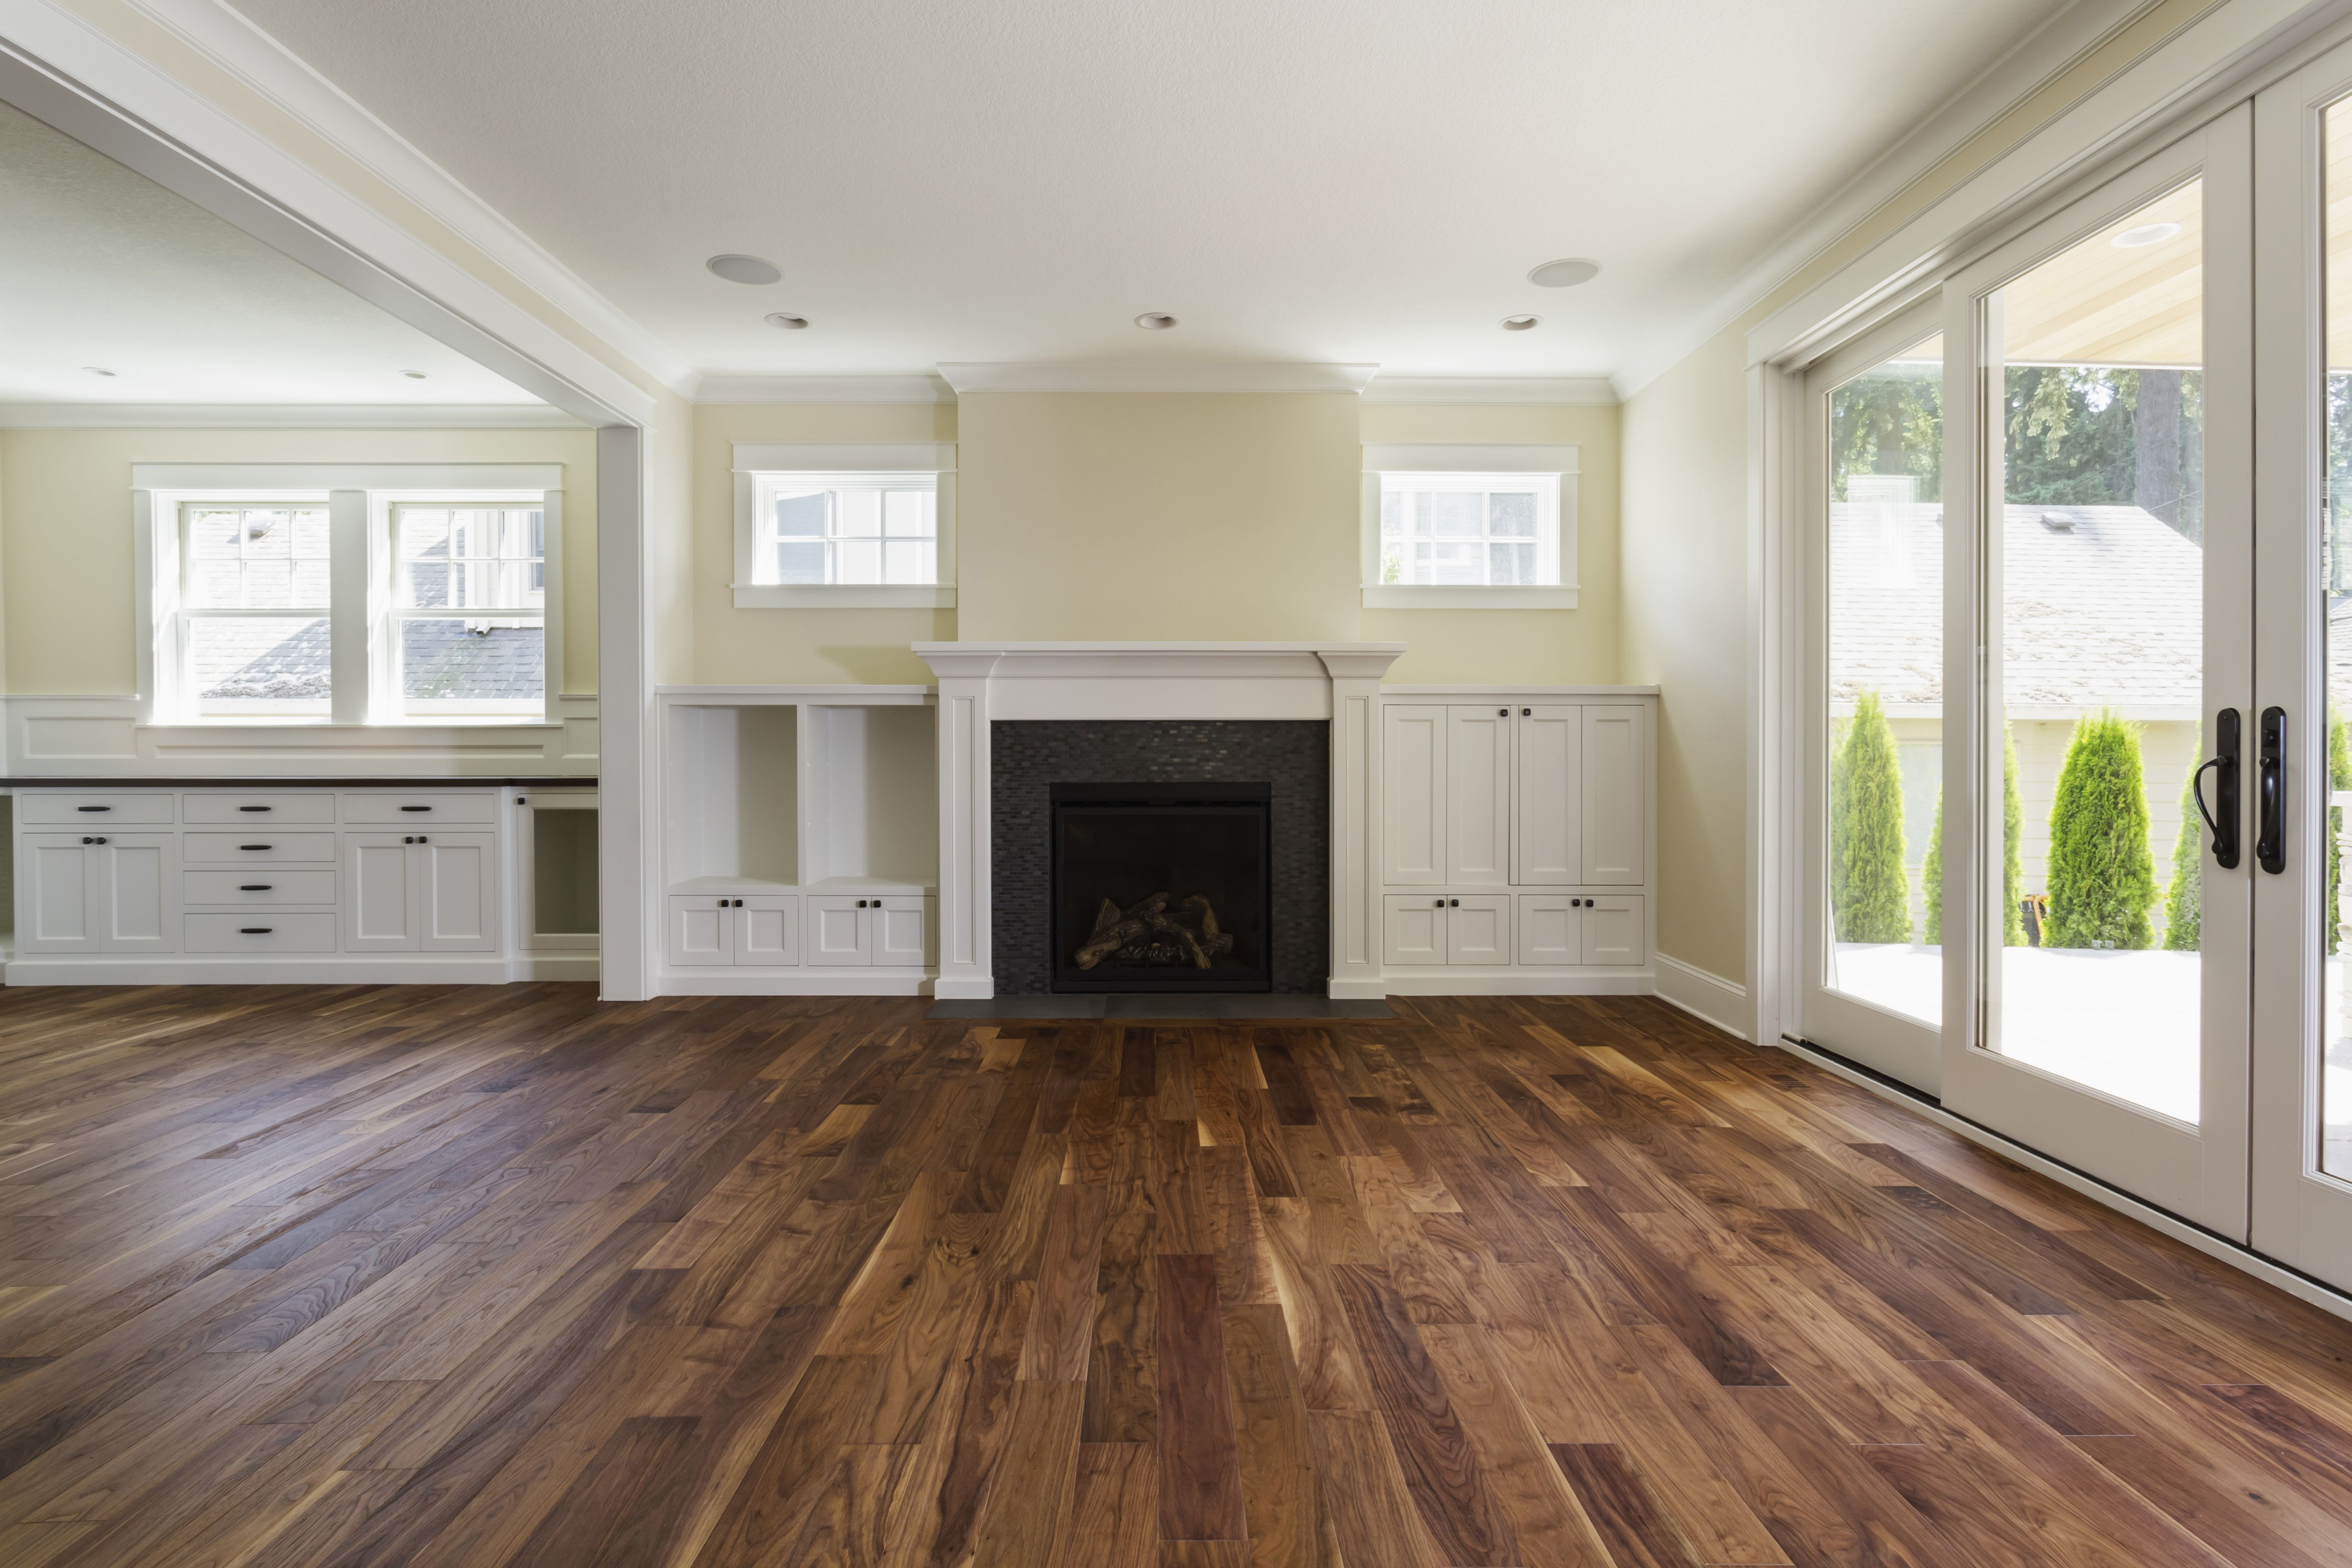 11 Stylish Hardwood Flooring Manufacturing Process 2024 free download hardwood flooring manufacturing process of the pros and cons of prefinished hardwood flooring pertaining to fireplace and built in shelves in living room 482143011 57bef8e33df78cc16e035397